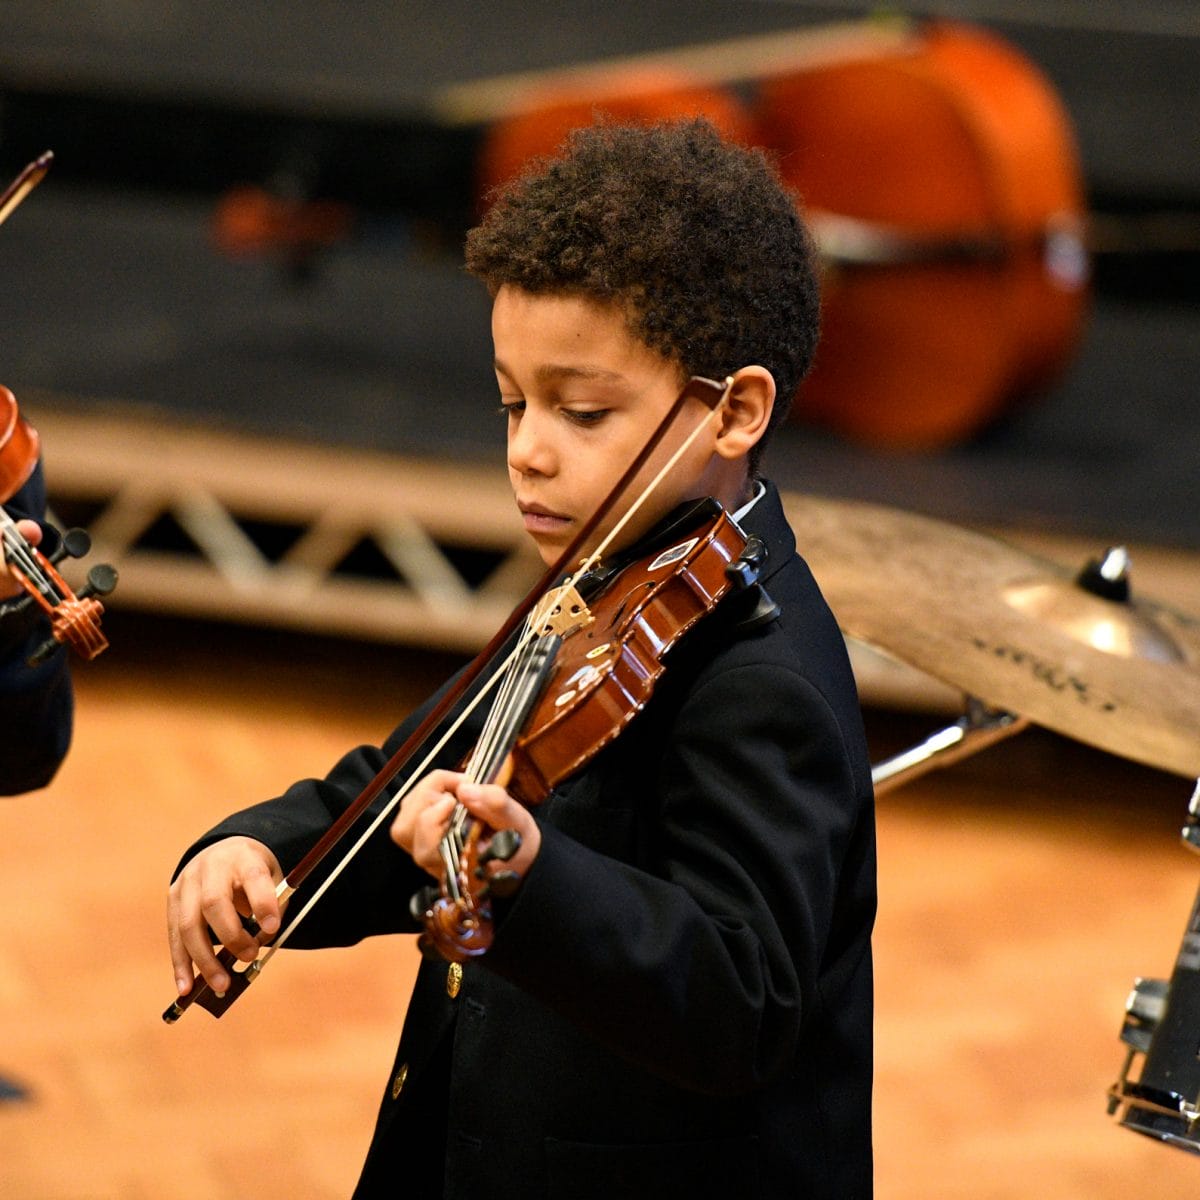 A boy playing the violin at a concert.